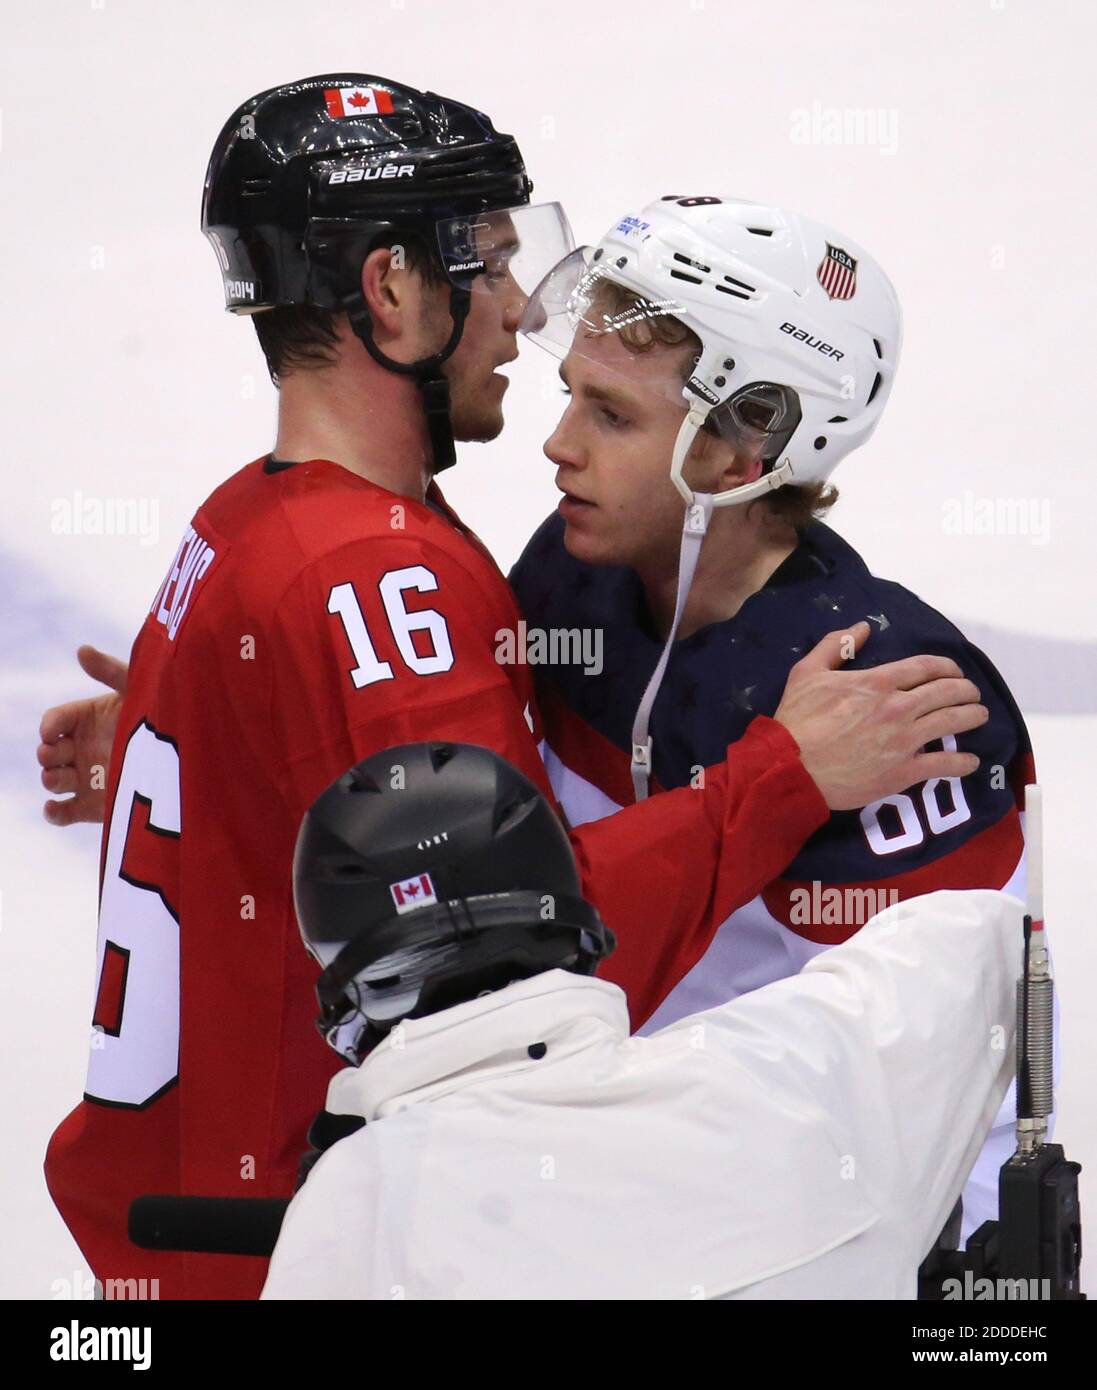 NO FILM, NO VIDEO, NO TV, NO DOCUMENTARY - Canada forward Jonathan Toews (16) hugs USA forward Patrick Kane (88) after a men's hockey semifinal at Bolshoy Ice Dome during the Winter Olympics in Sochi, Russia, Friday, February 21, 2014. Canada defeated the USA 1-0 to advance to the gold medal game. Photo by Brian Cassella/Chicago Tribune/MCT/ABACAPRESS.COM Stock Photo